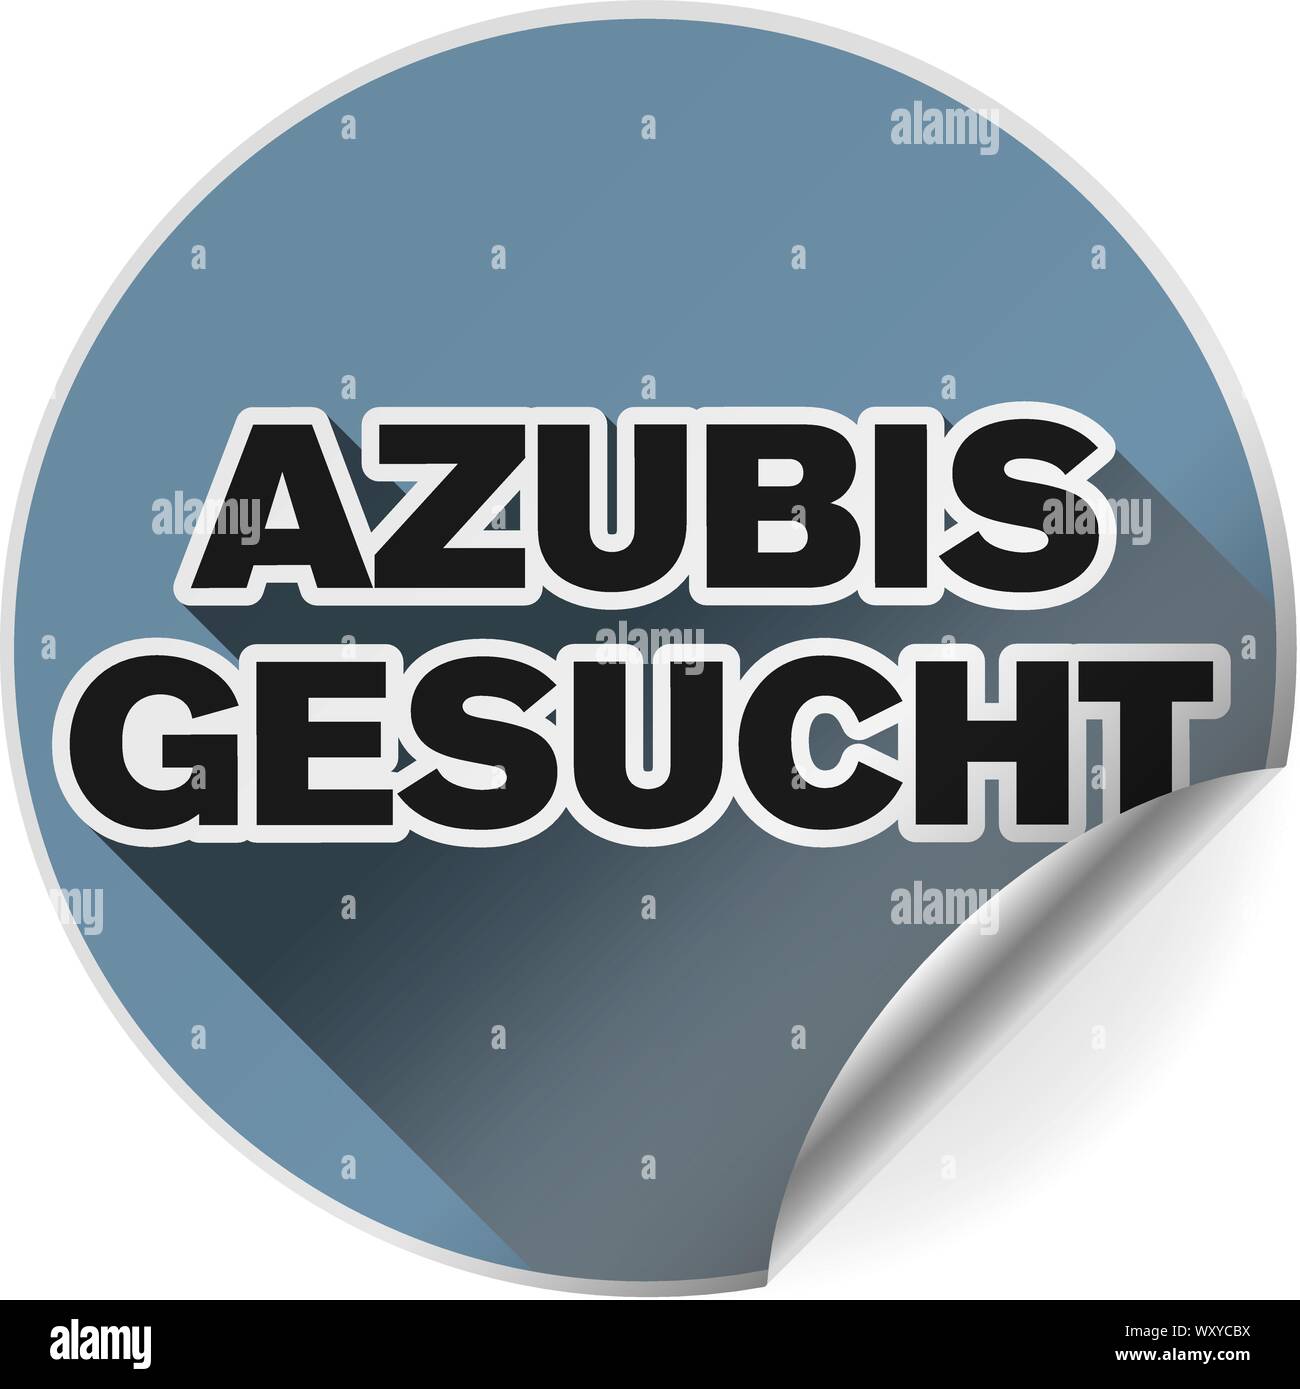 round badge or sticker with text AZUBIS GESUCHT, German for trainees wanted, vector illustration Stock Vector